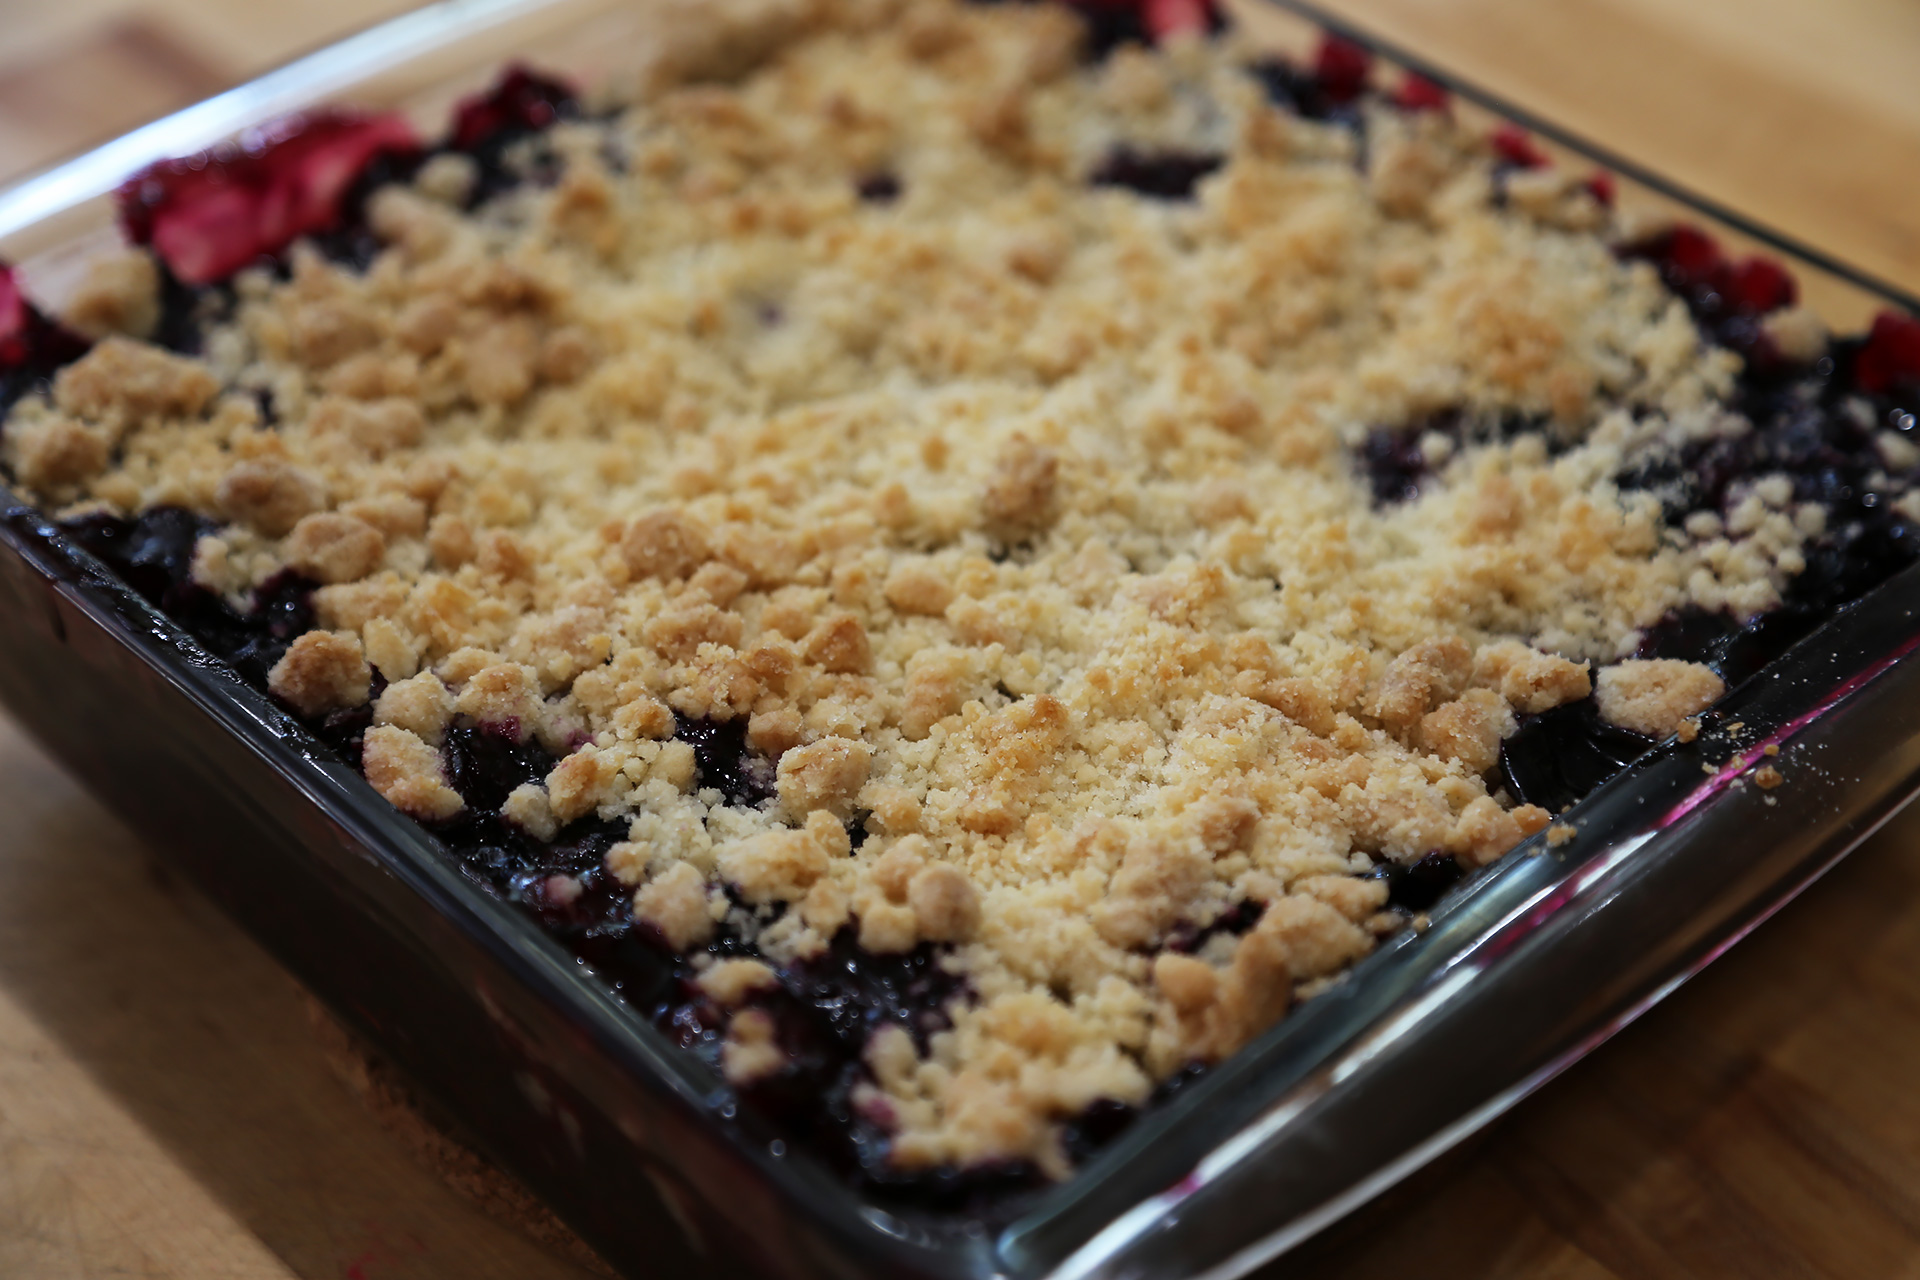 Bake until the filling is bubbling and the crumble is golden brown, about 45 minutes.